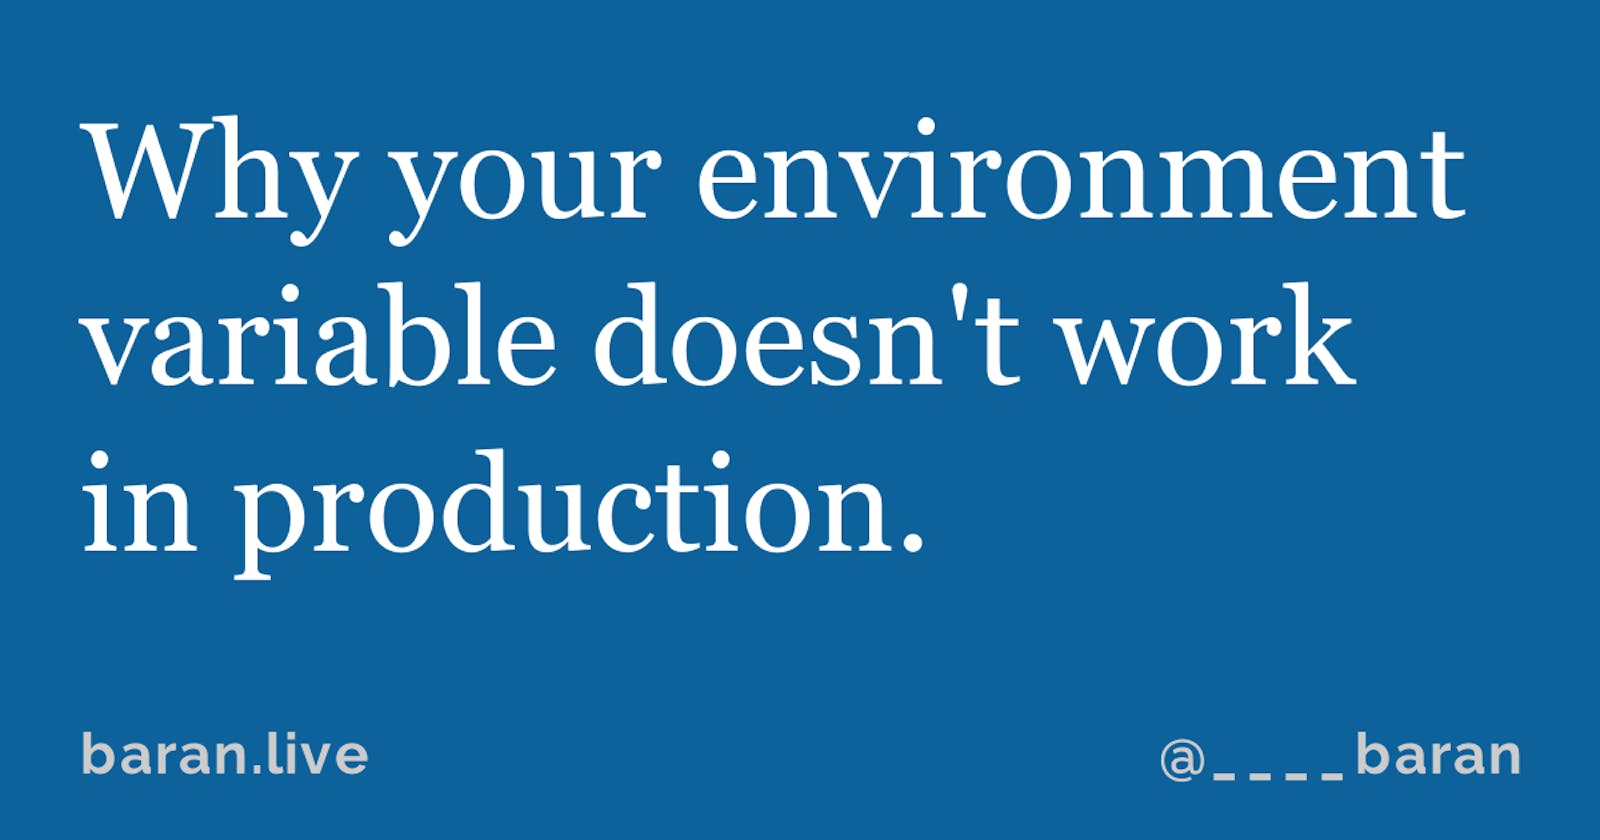 Why your environment variable doesn't work in production.